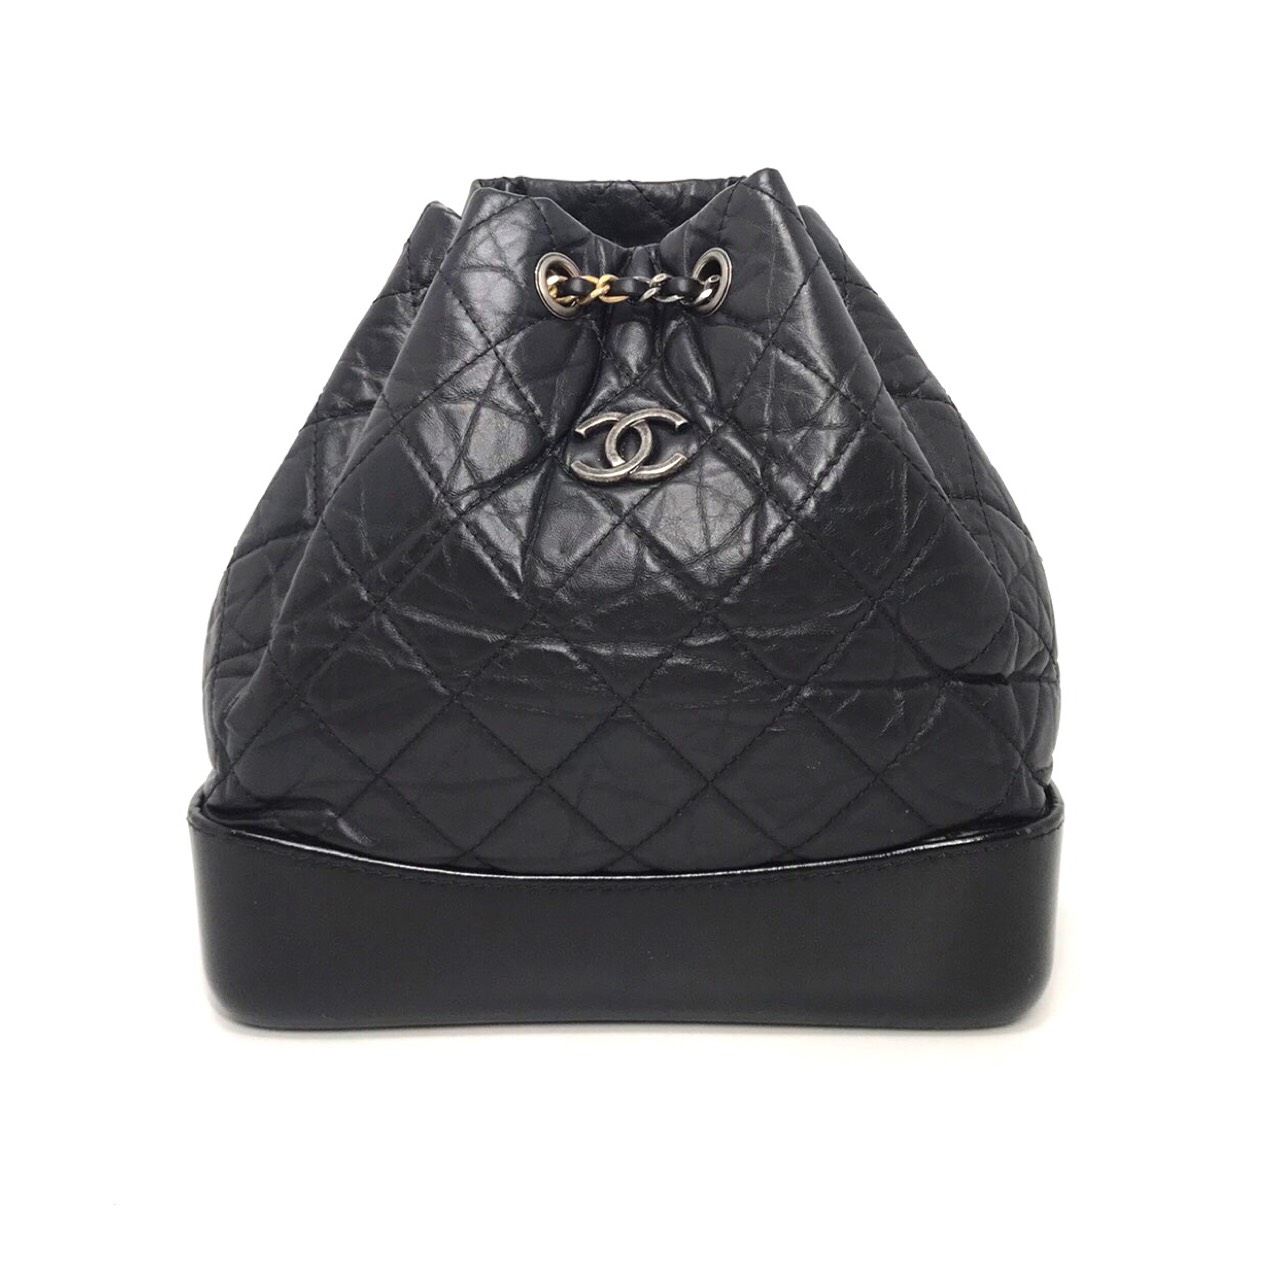 Used Chanel Gabrielle Backpack Small in Black Calfskin R/GHW